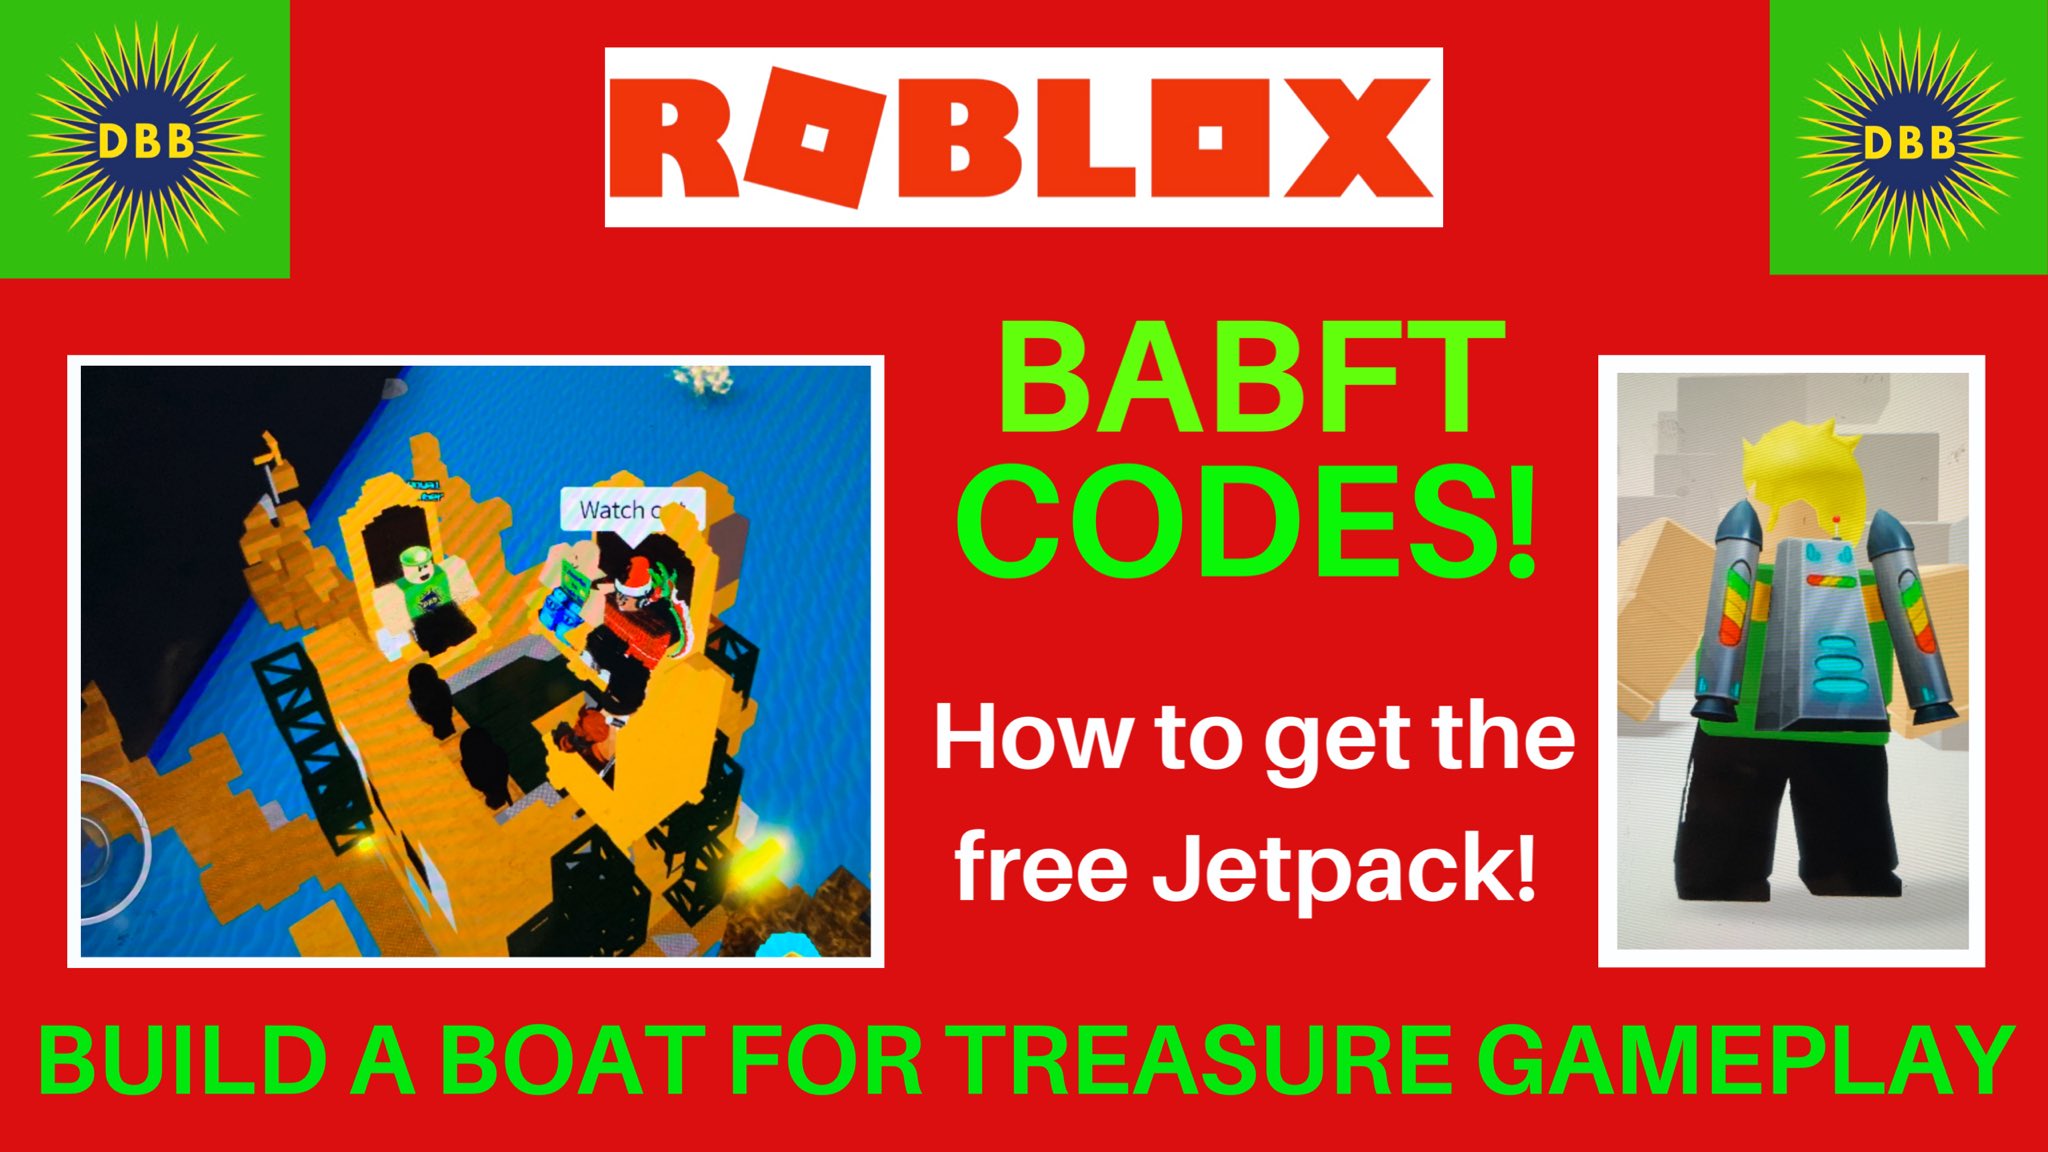 Deathbotbrothers On Twitter Roblox Codes Build A Boat For Treasure Babft Codes And Gameplay Plus How Https T Co Zckwa2iipk Via Youtube Roblox Robloxcodes Robloxgameplay Robloxbabft Babftcodes Buildaboatcodes Buildaboatfortreasure - 2019 codes for build a boat roblox youtube